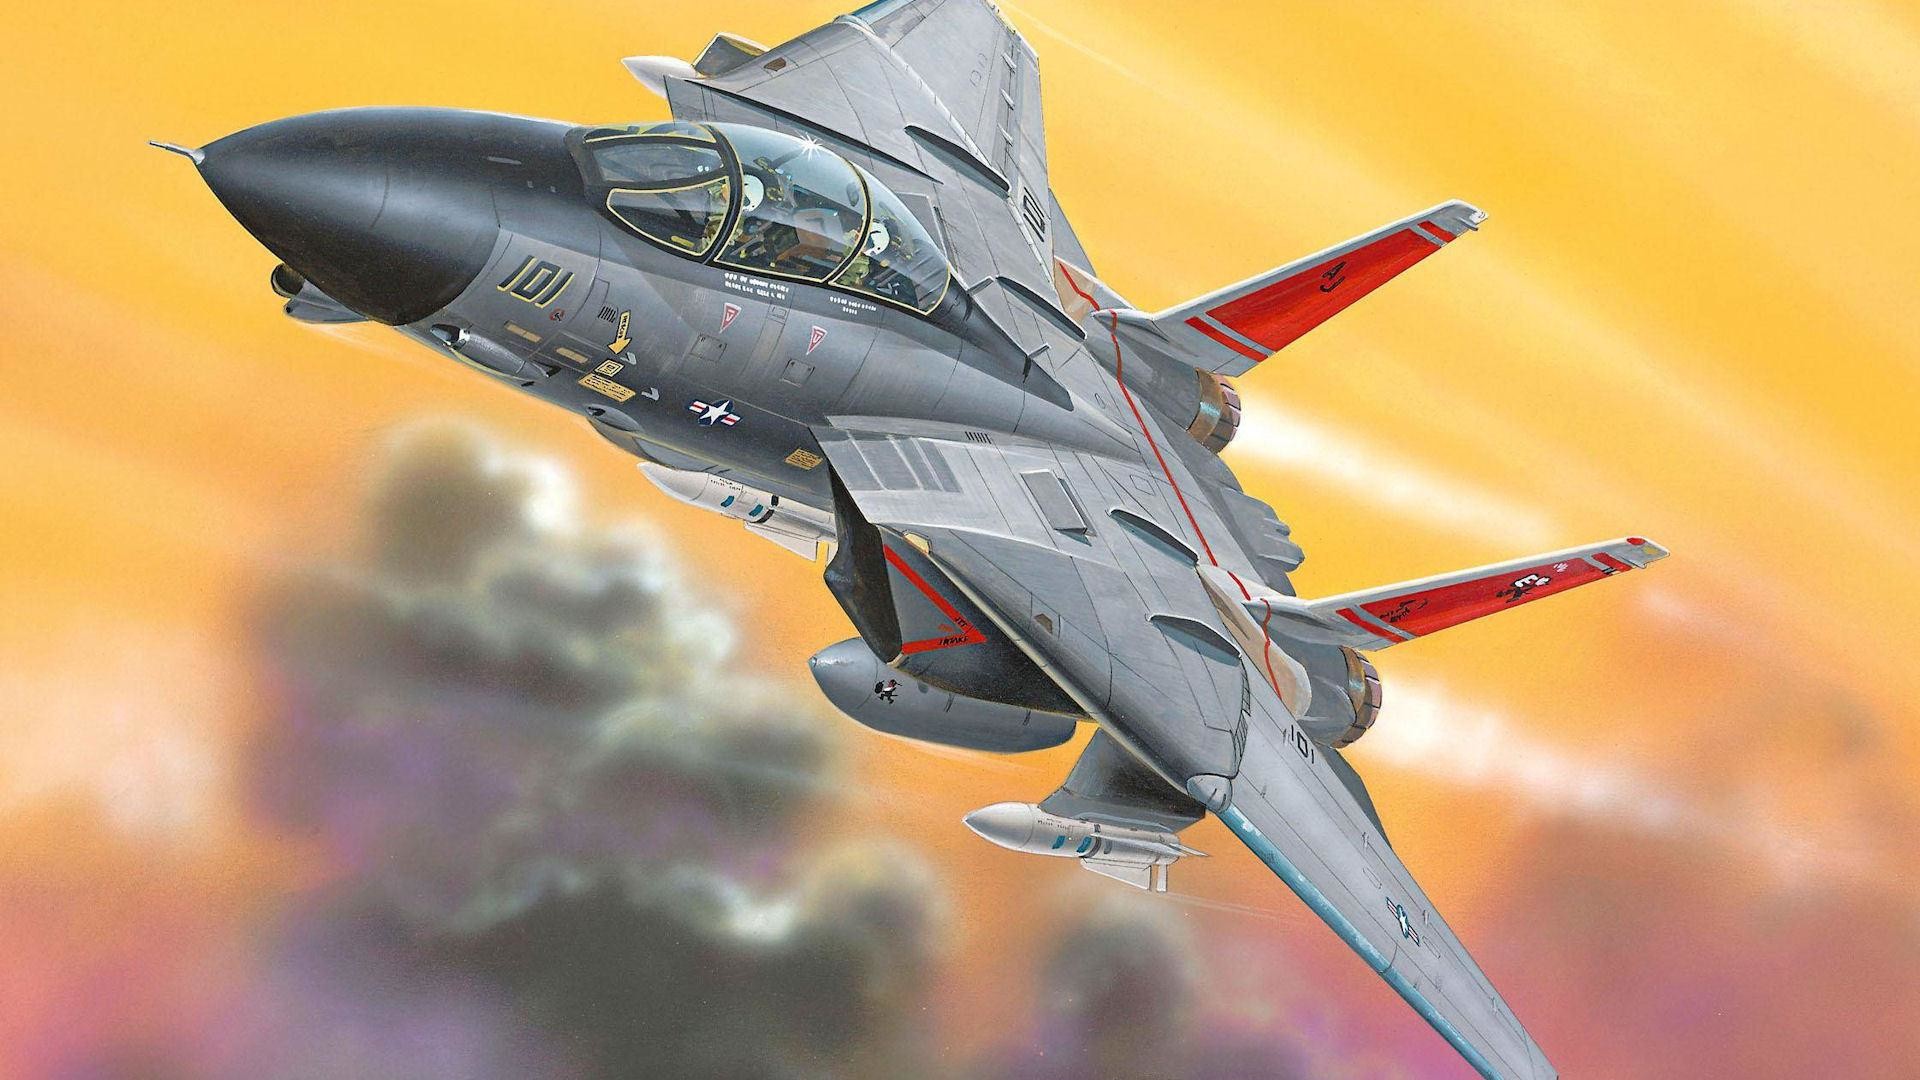 1920x1080 Grumman F-14 Tomcat wallpapers for android